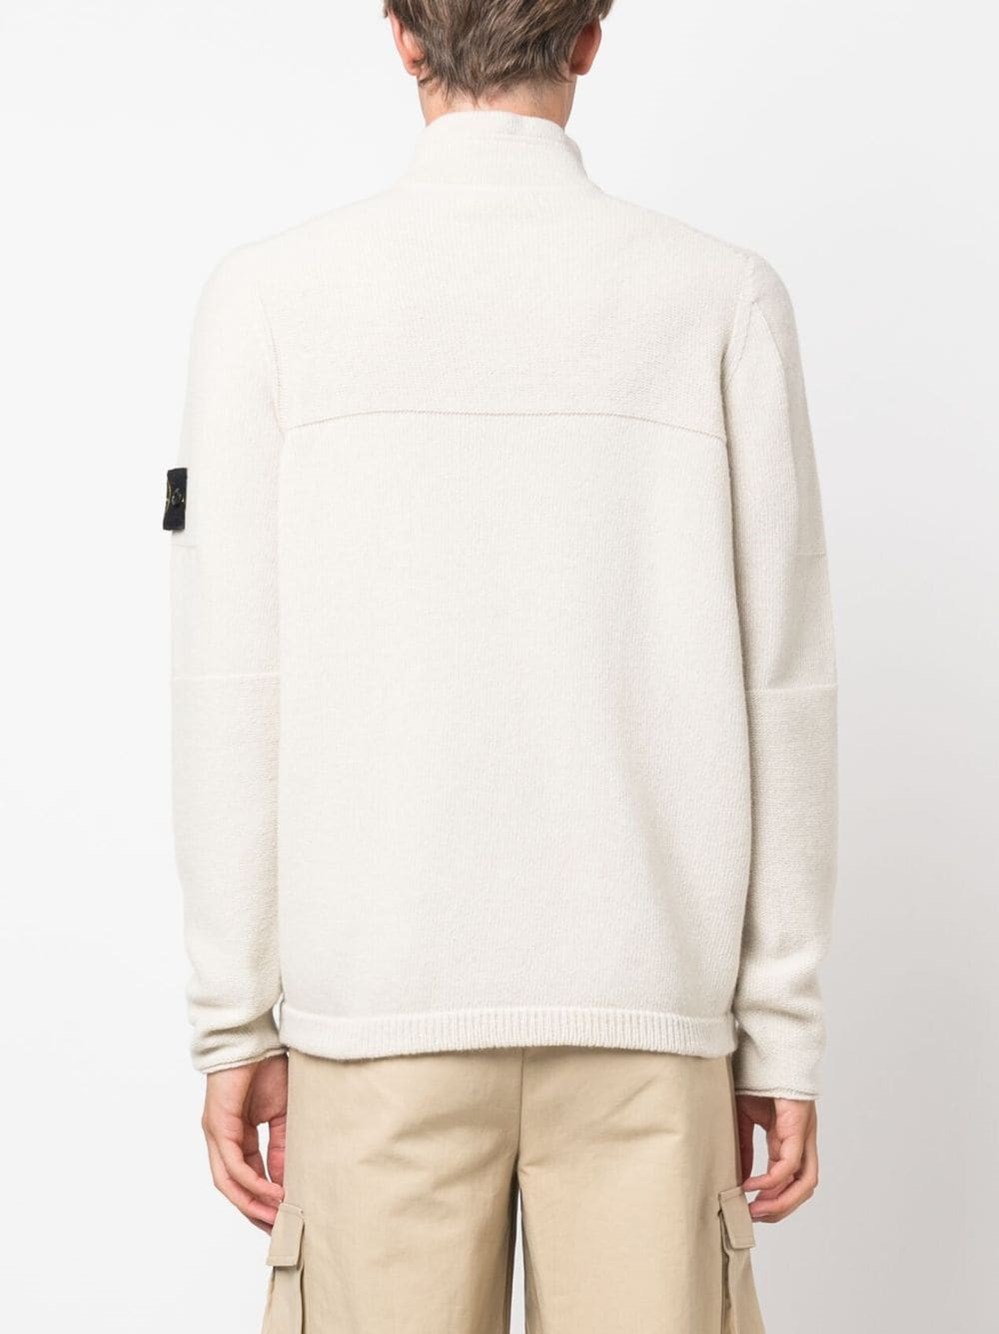 stone island 7915529A3 V0097 PLASTER available on montiboutique.com - 57329